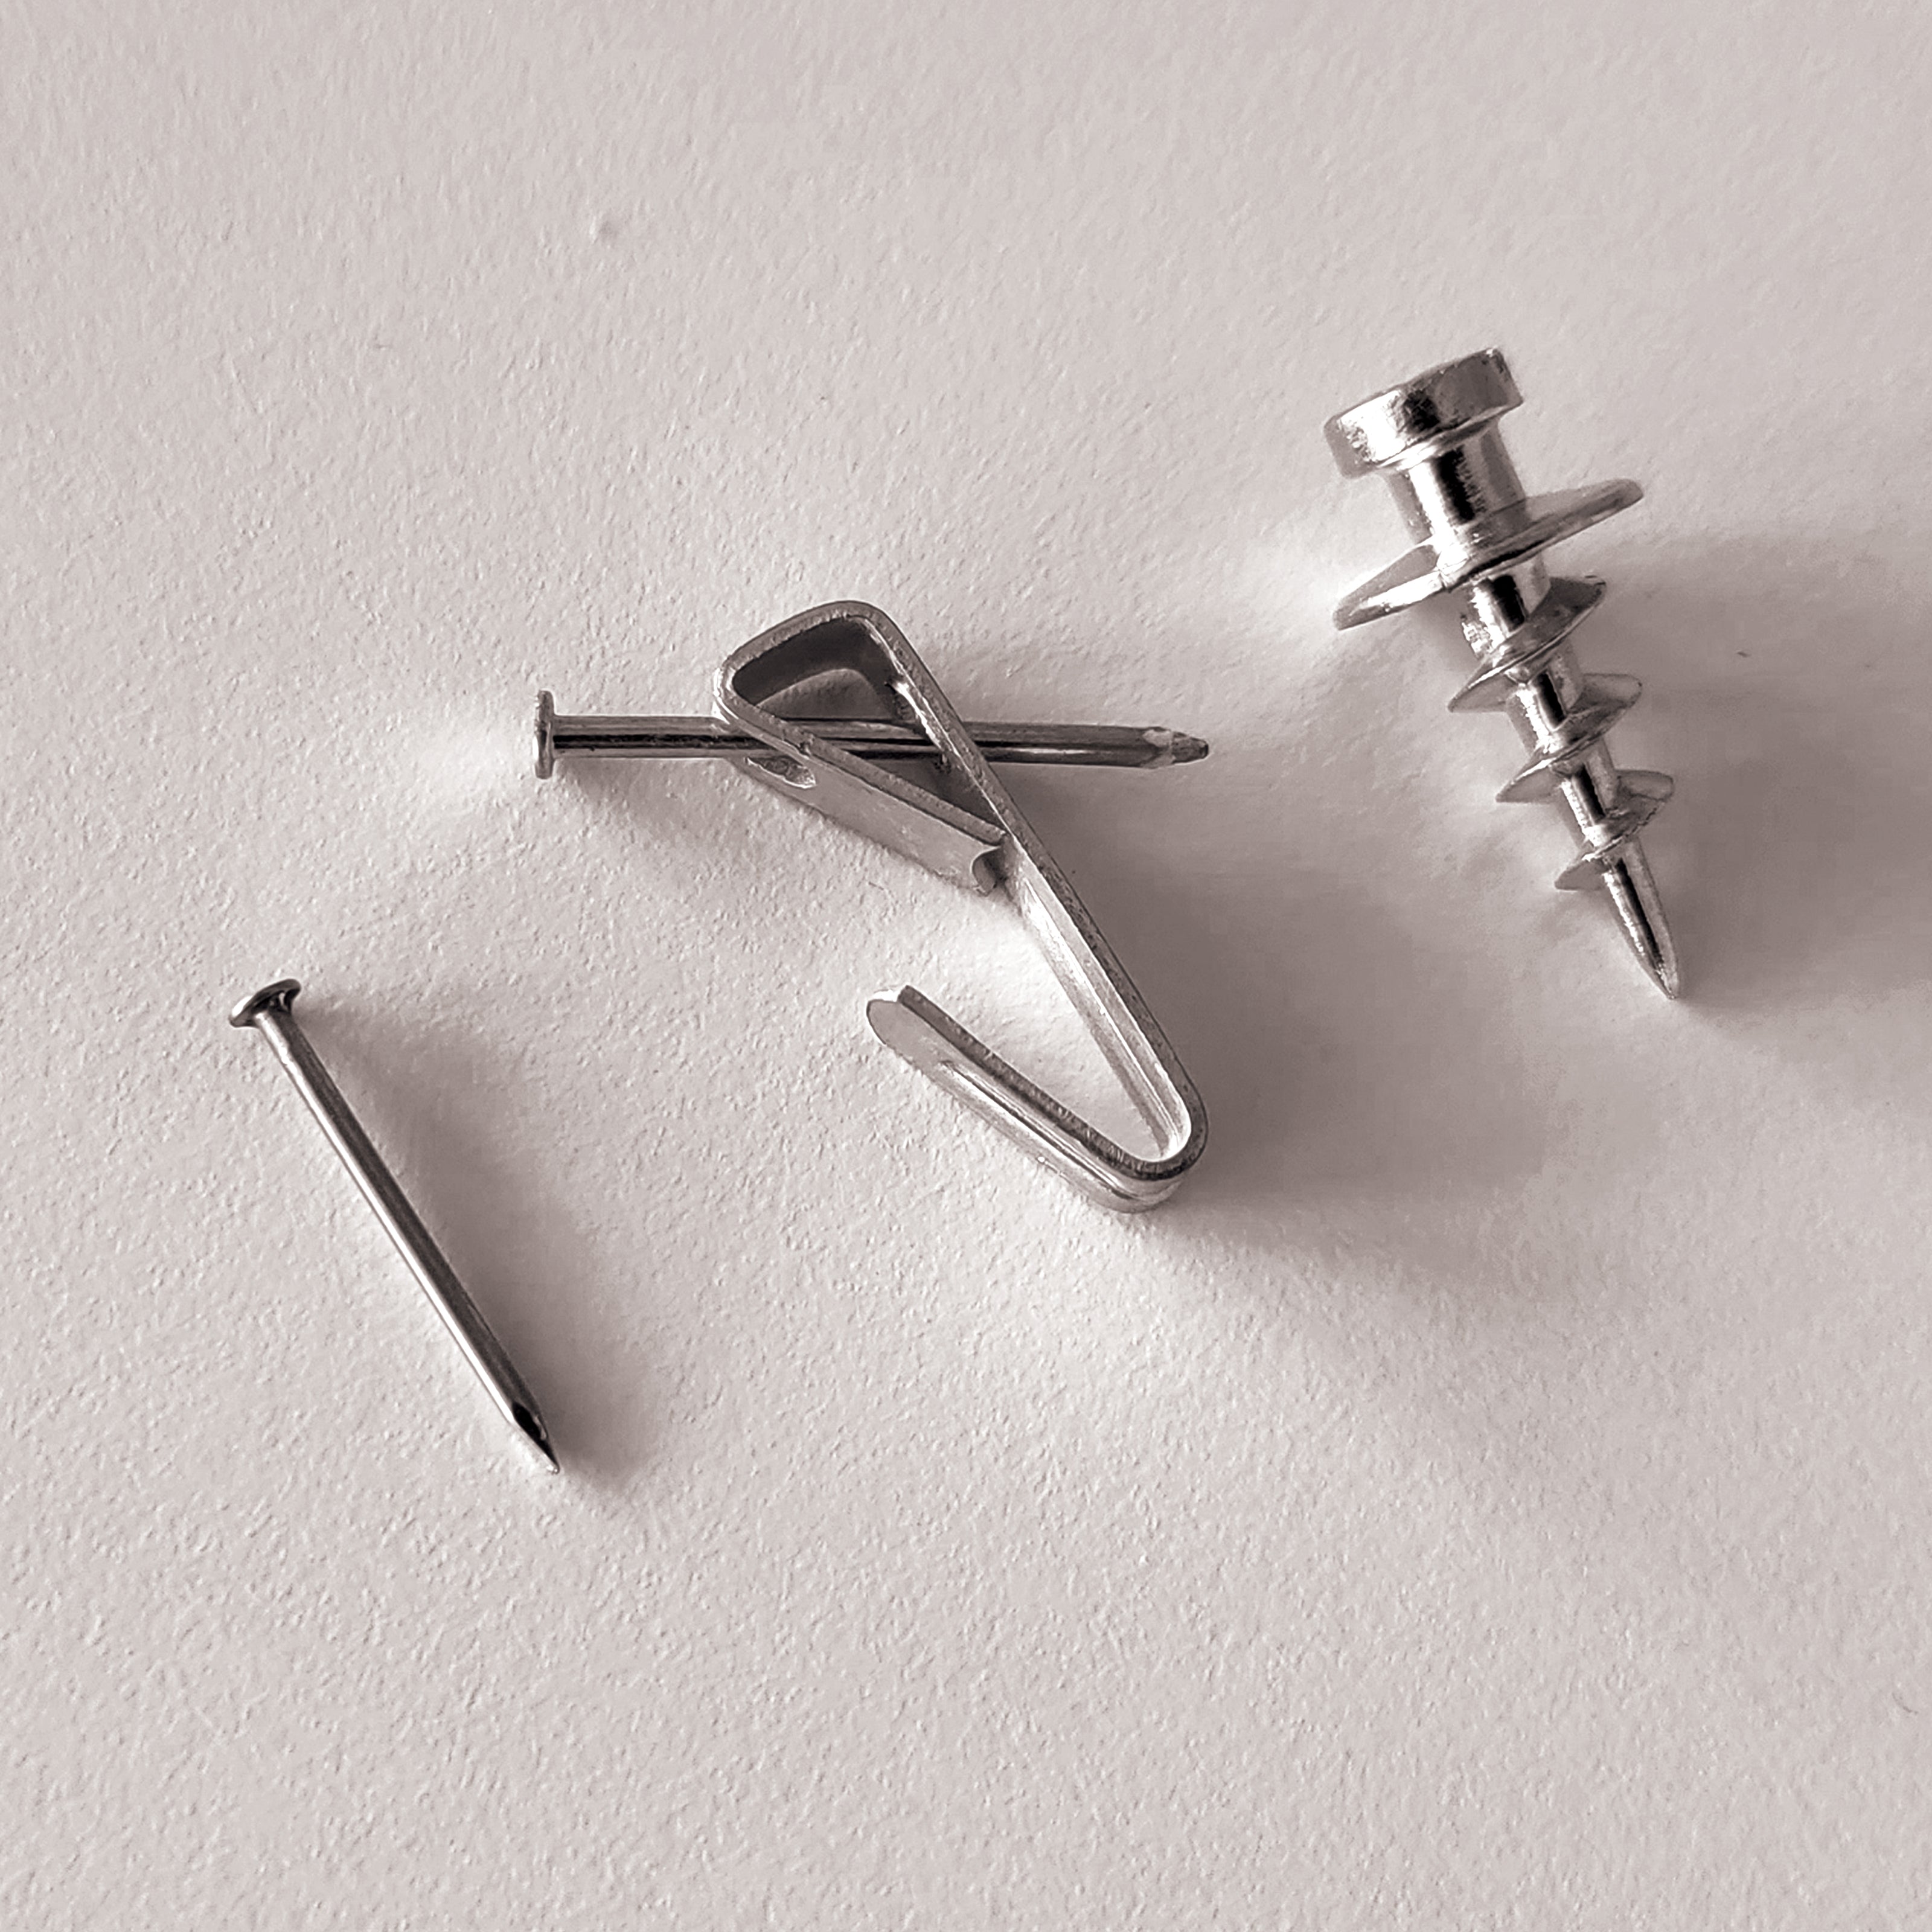 a nail, a picture hanger, and a self-drilling screw hardware